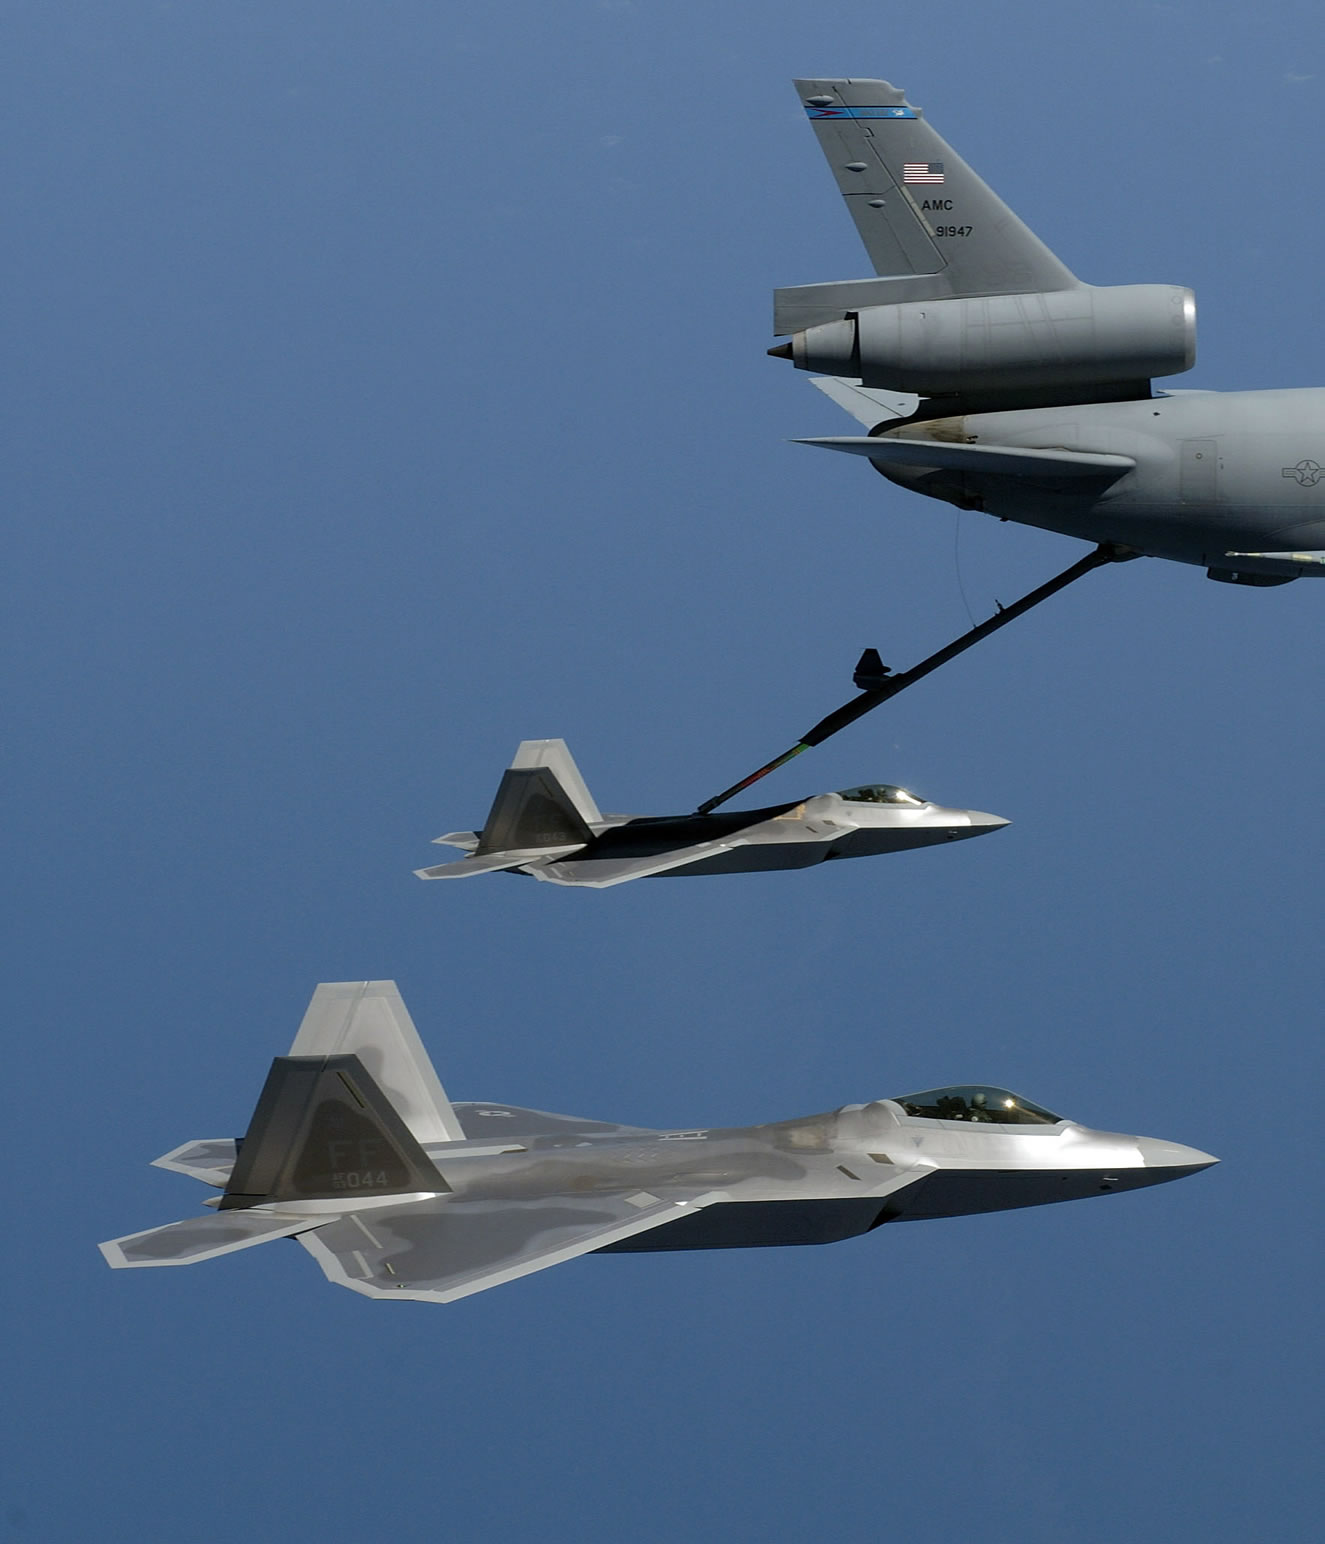 Free Military Desktop Wallpaper - Bombers, Fighter Jets and more Photos1325 x 1544